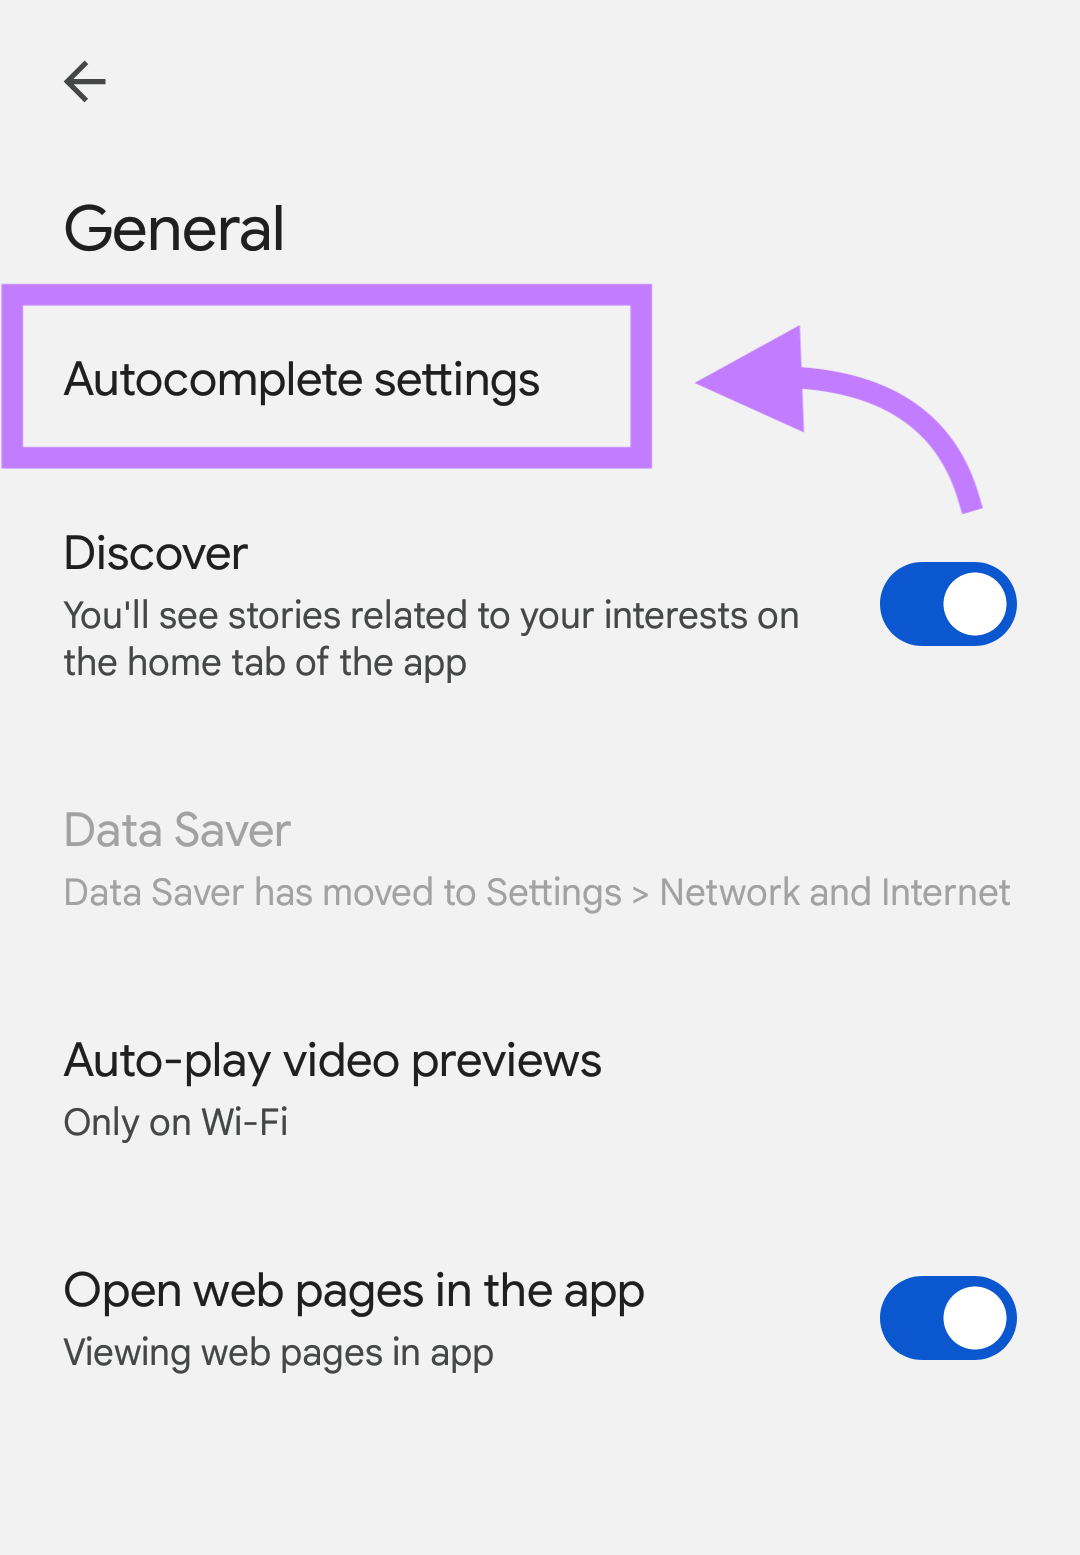 "Autocomplete settings” for Android devices